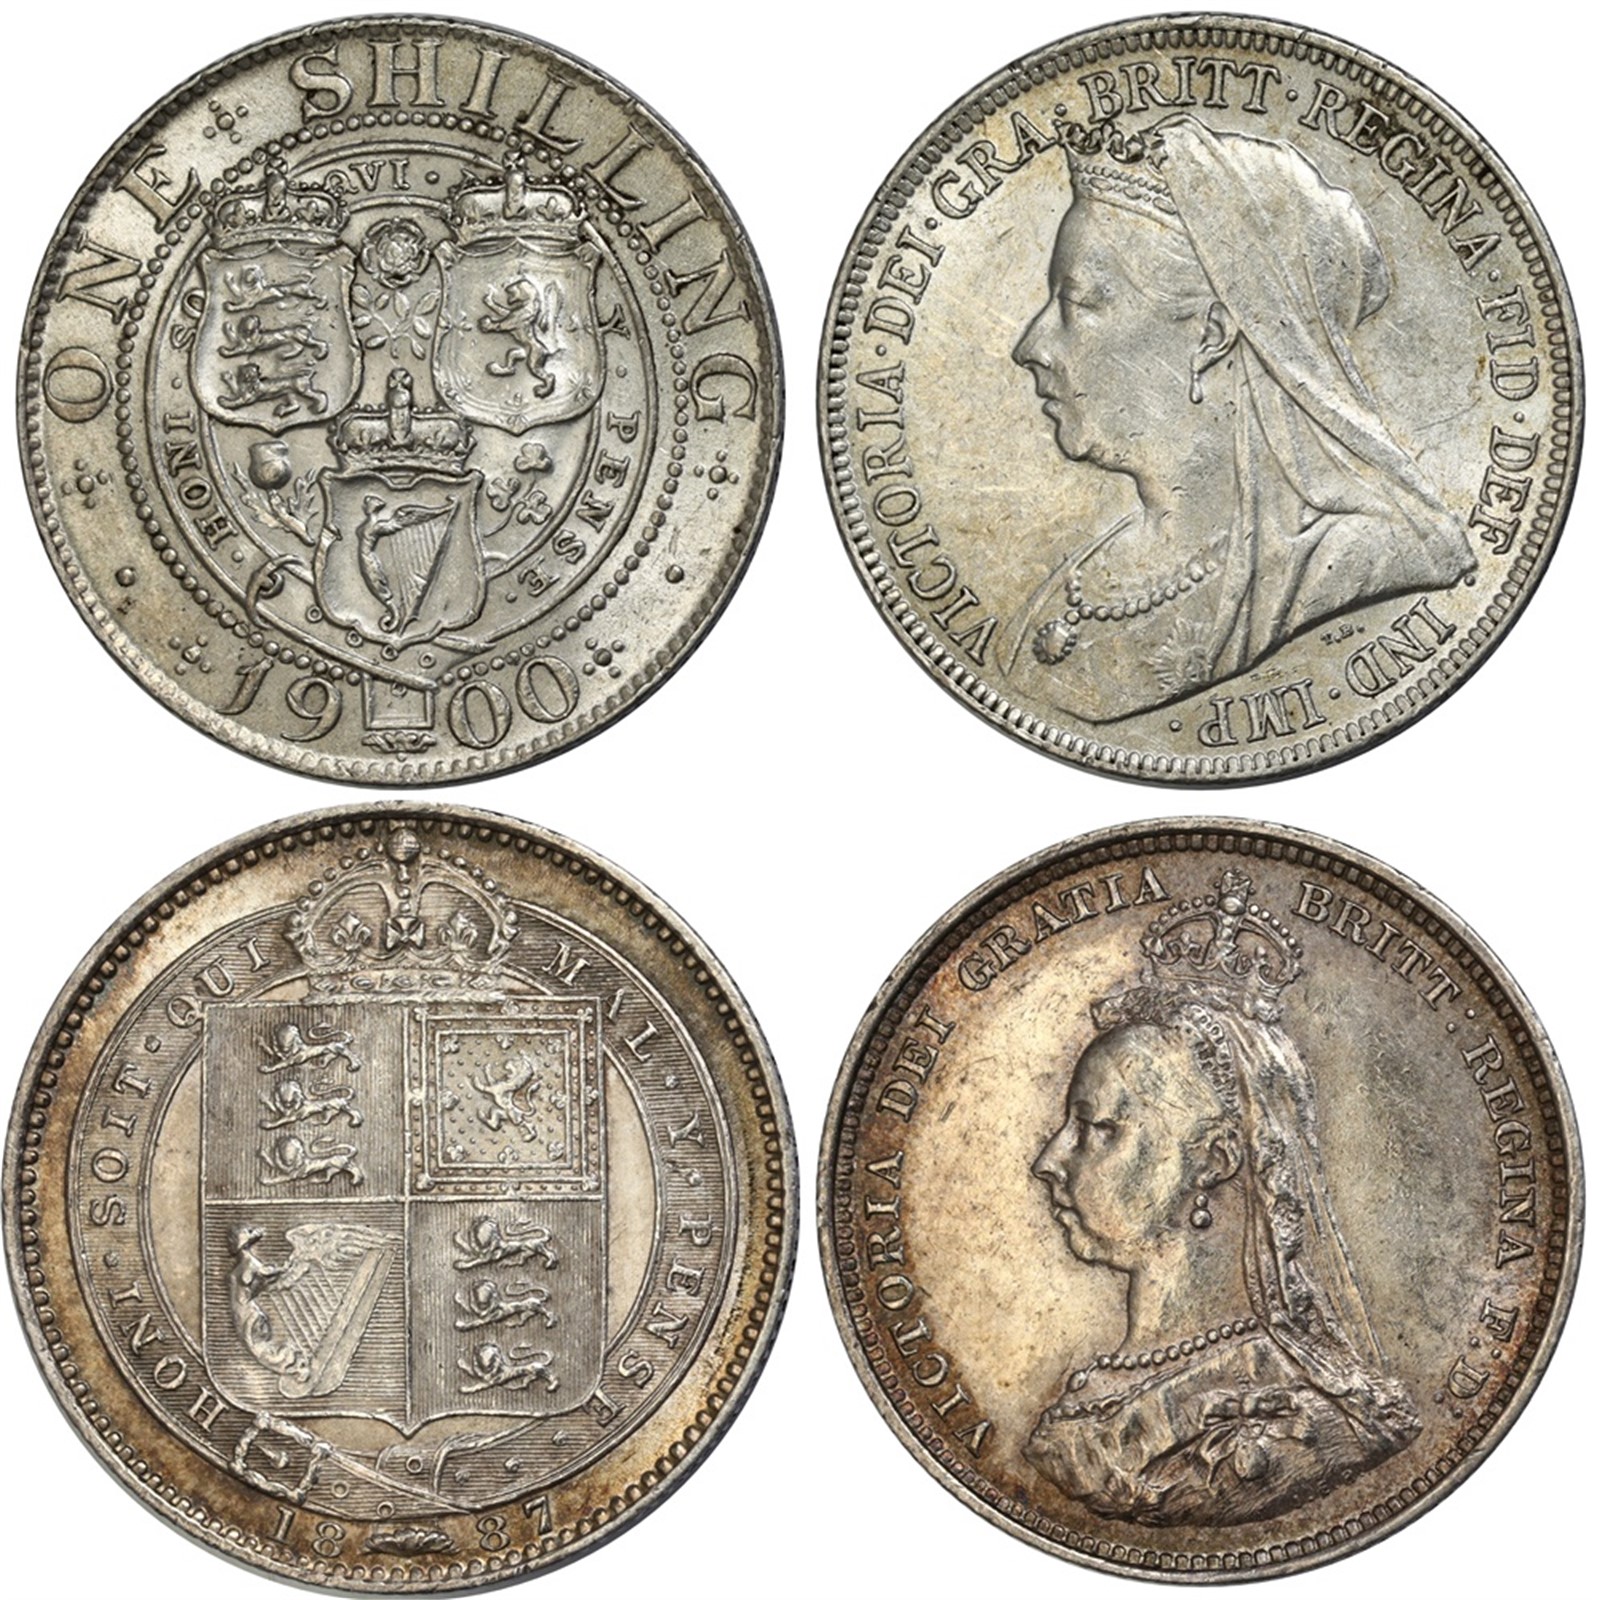 GREAT BRITAIN. Shilling 1887 and 1900 UNC